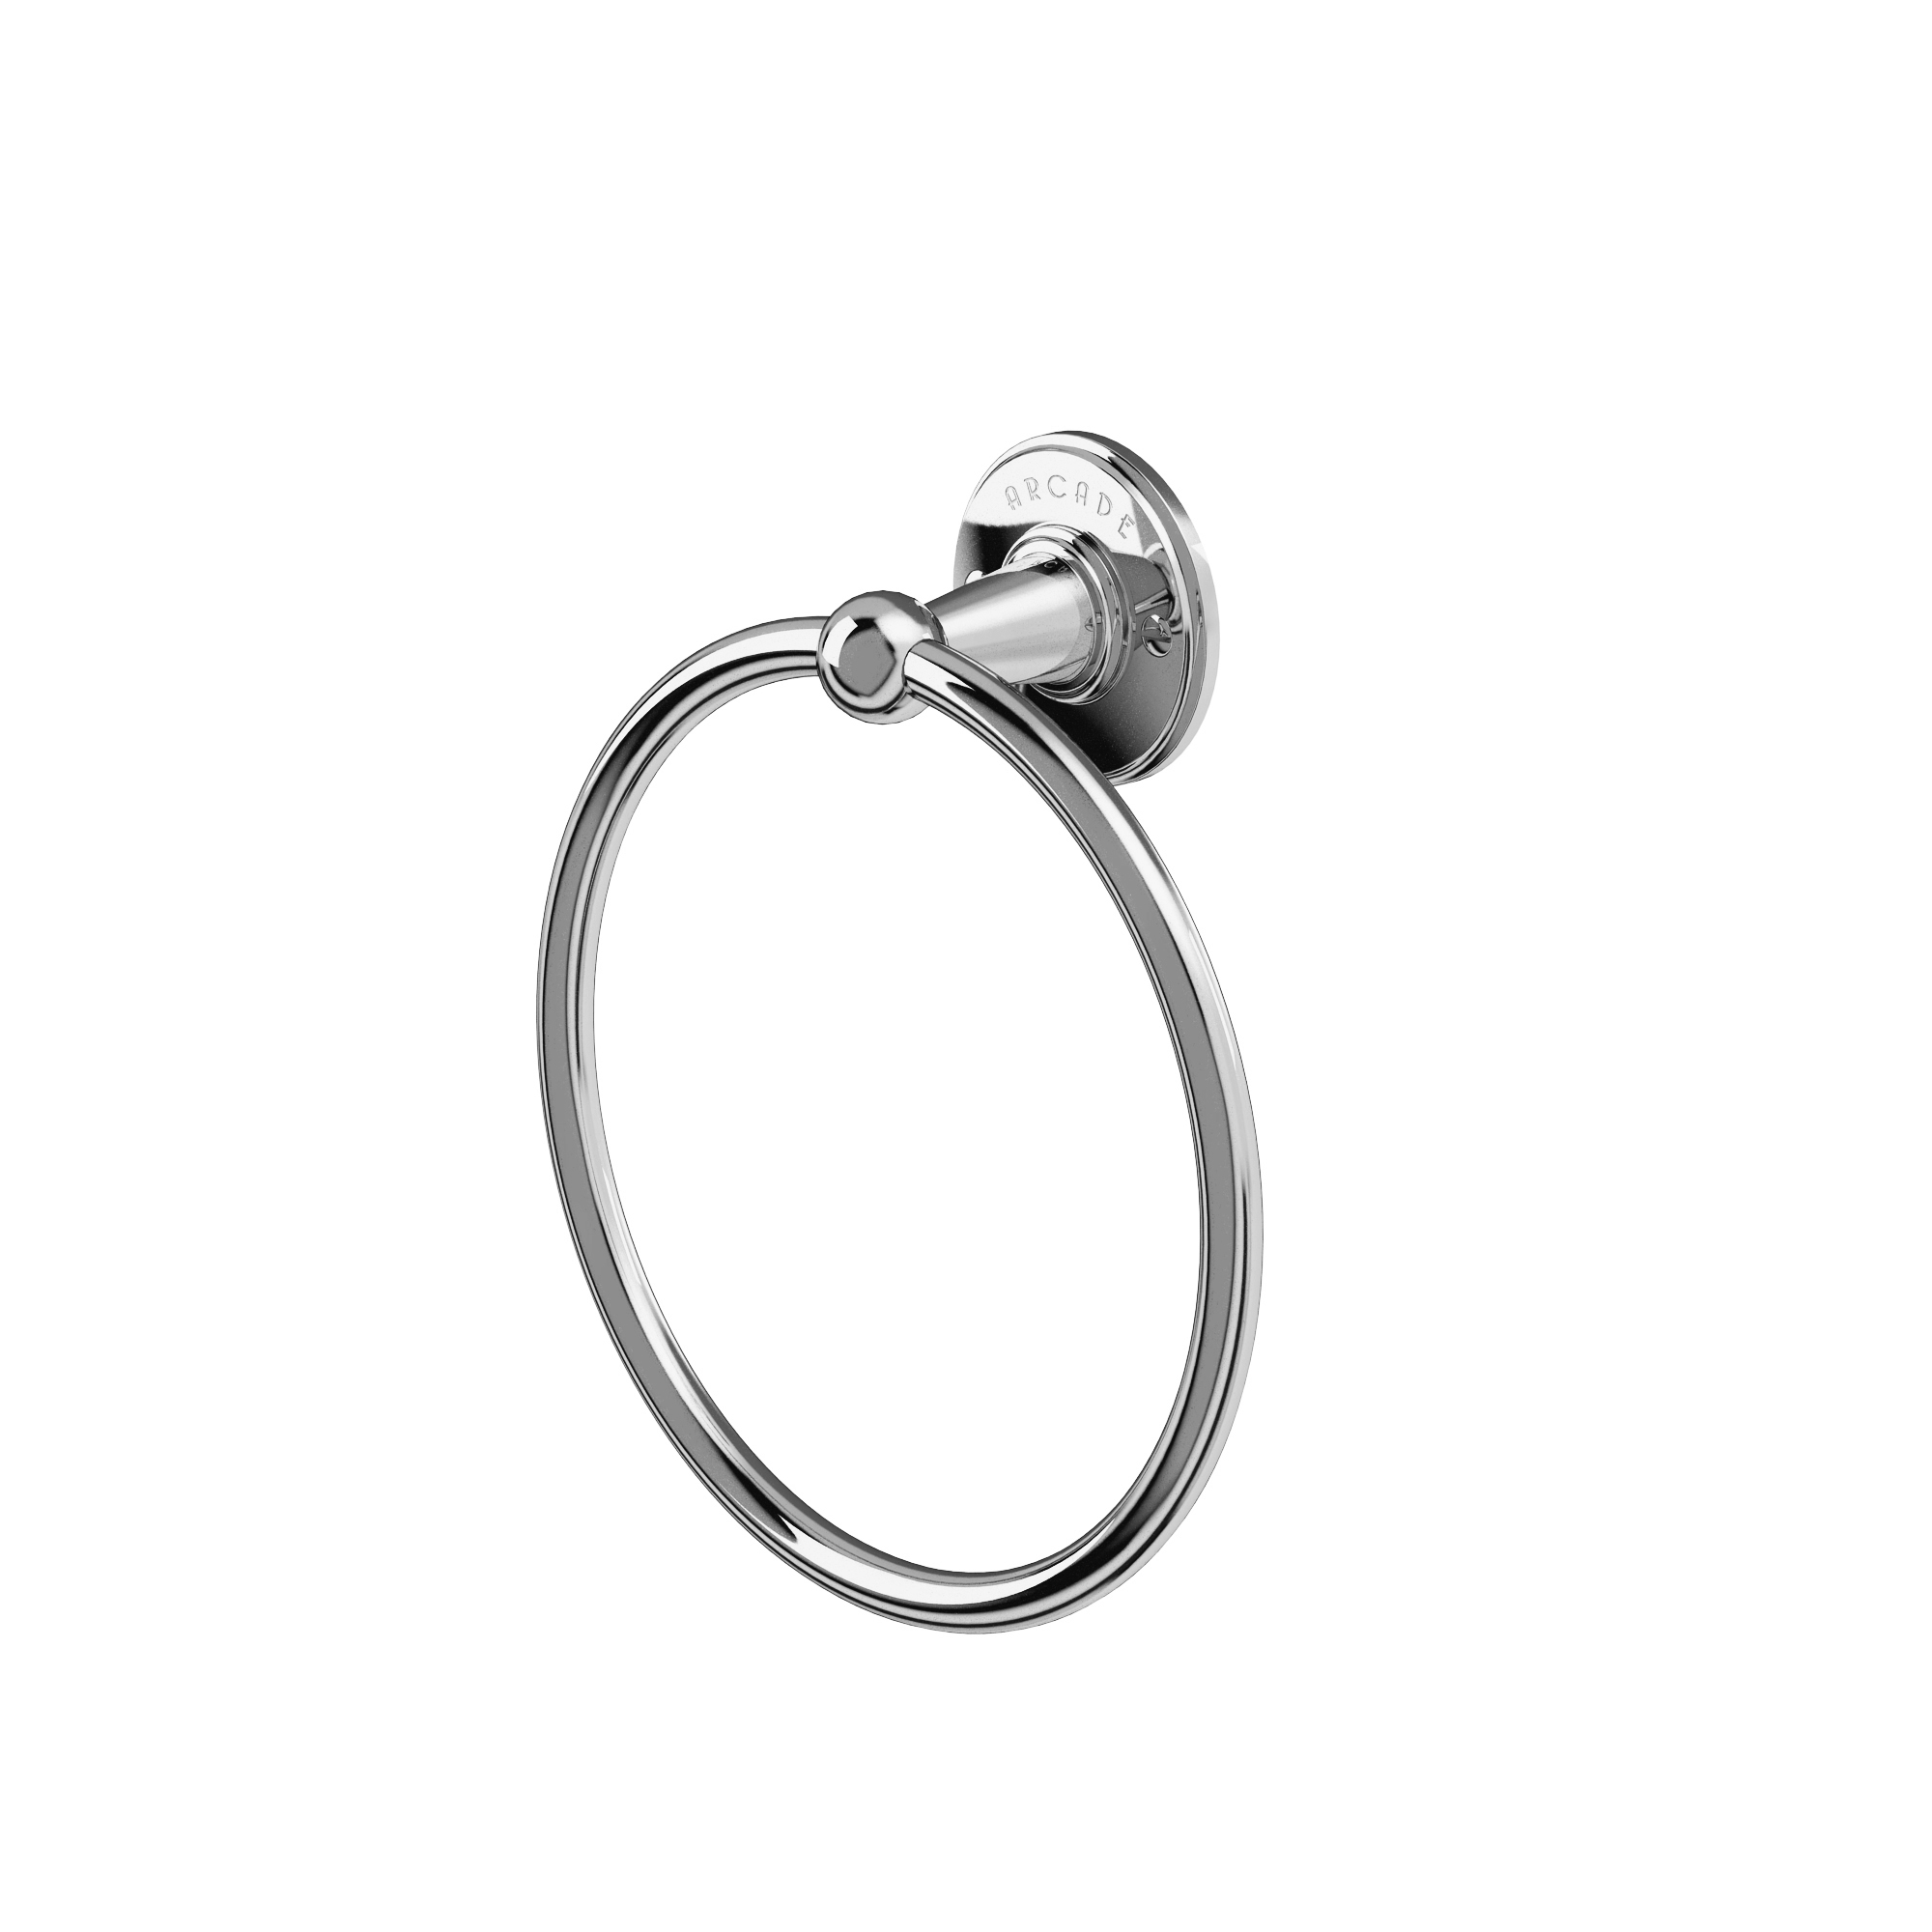 Arcade Wall-mounted towel ring - chrome